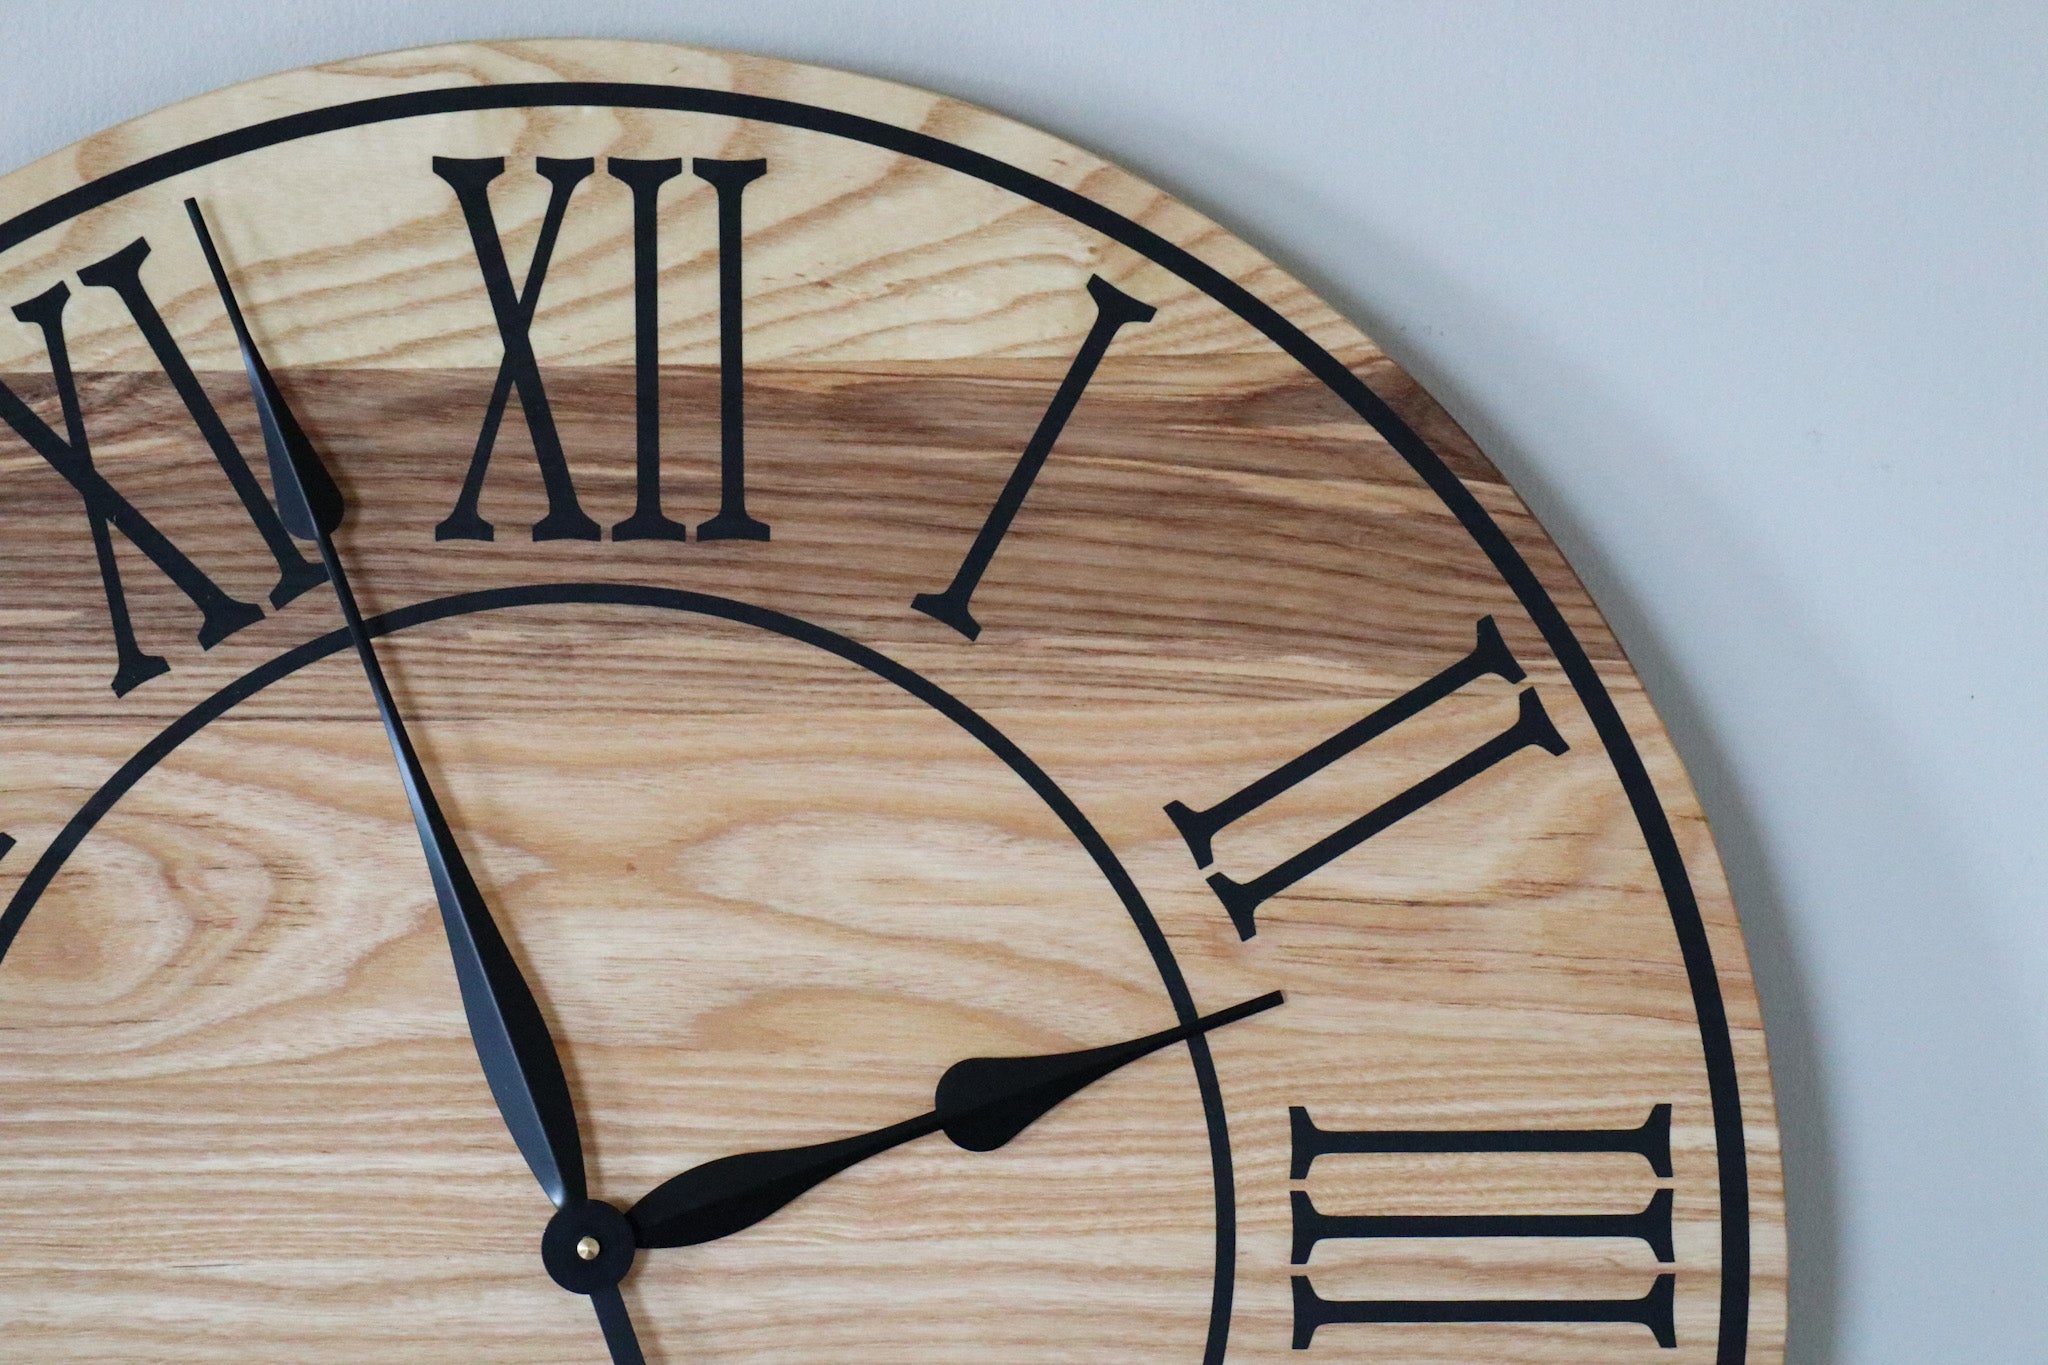 26" Solid Ash Wood Wall Clock with Black Numbers and Lines (in stock) - Hazel Oak Farms